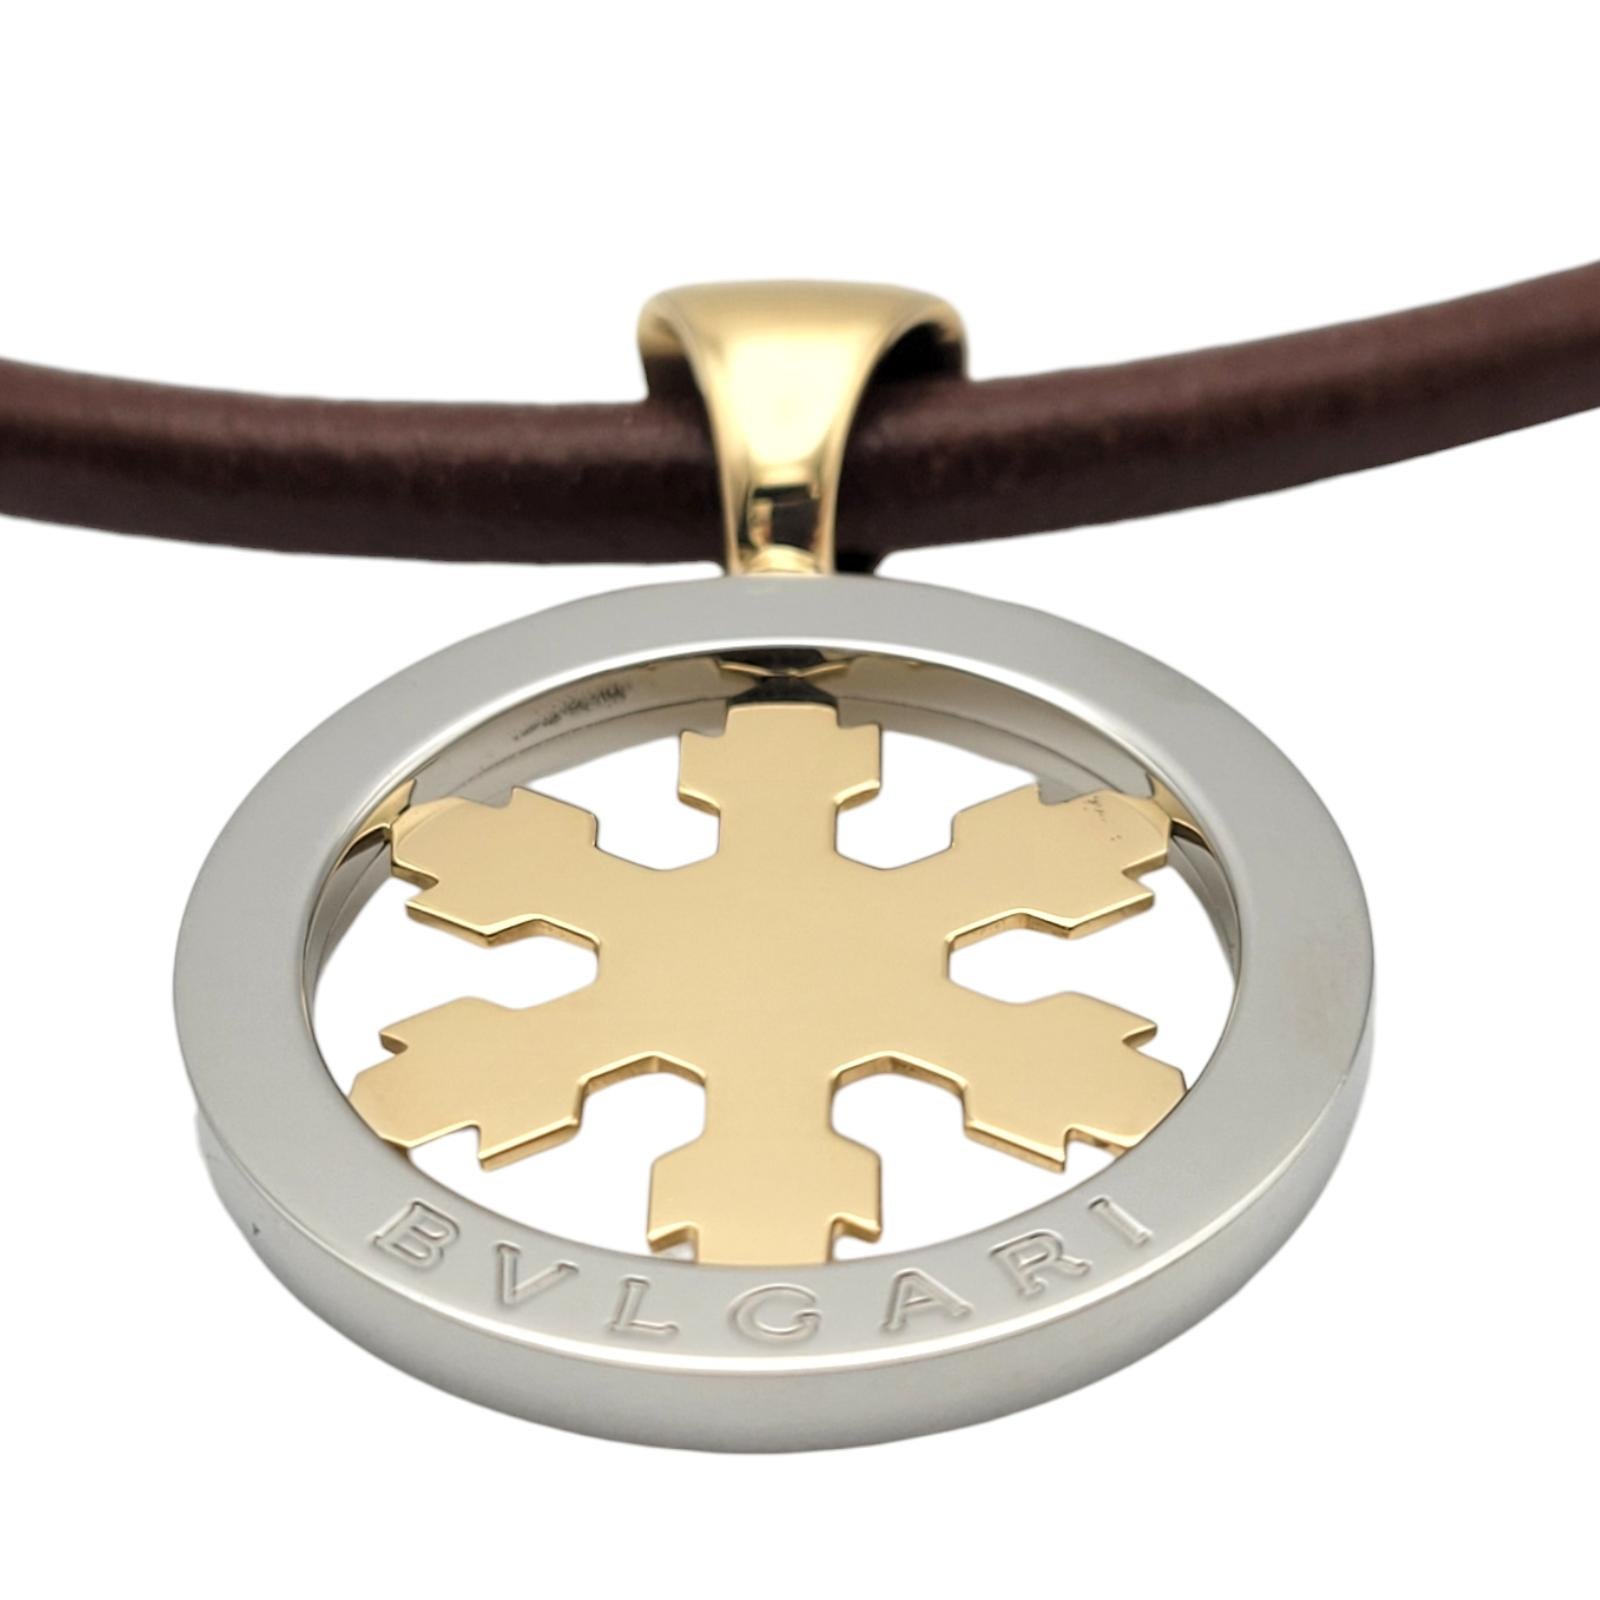 Elevate your style with this stunning Bulgari Tondo Snowflake Leather Necklace in 18K Yellow Gold & Stainless Steel. Crafted with meticulous attention to detail, this necklace is a true masterpiece of elegance and sophistication.

The open circle